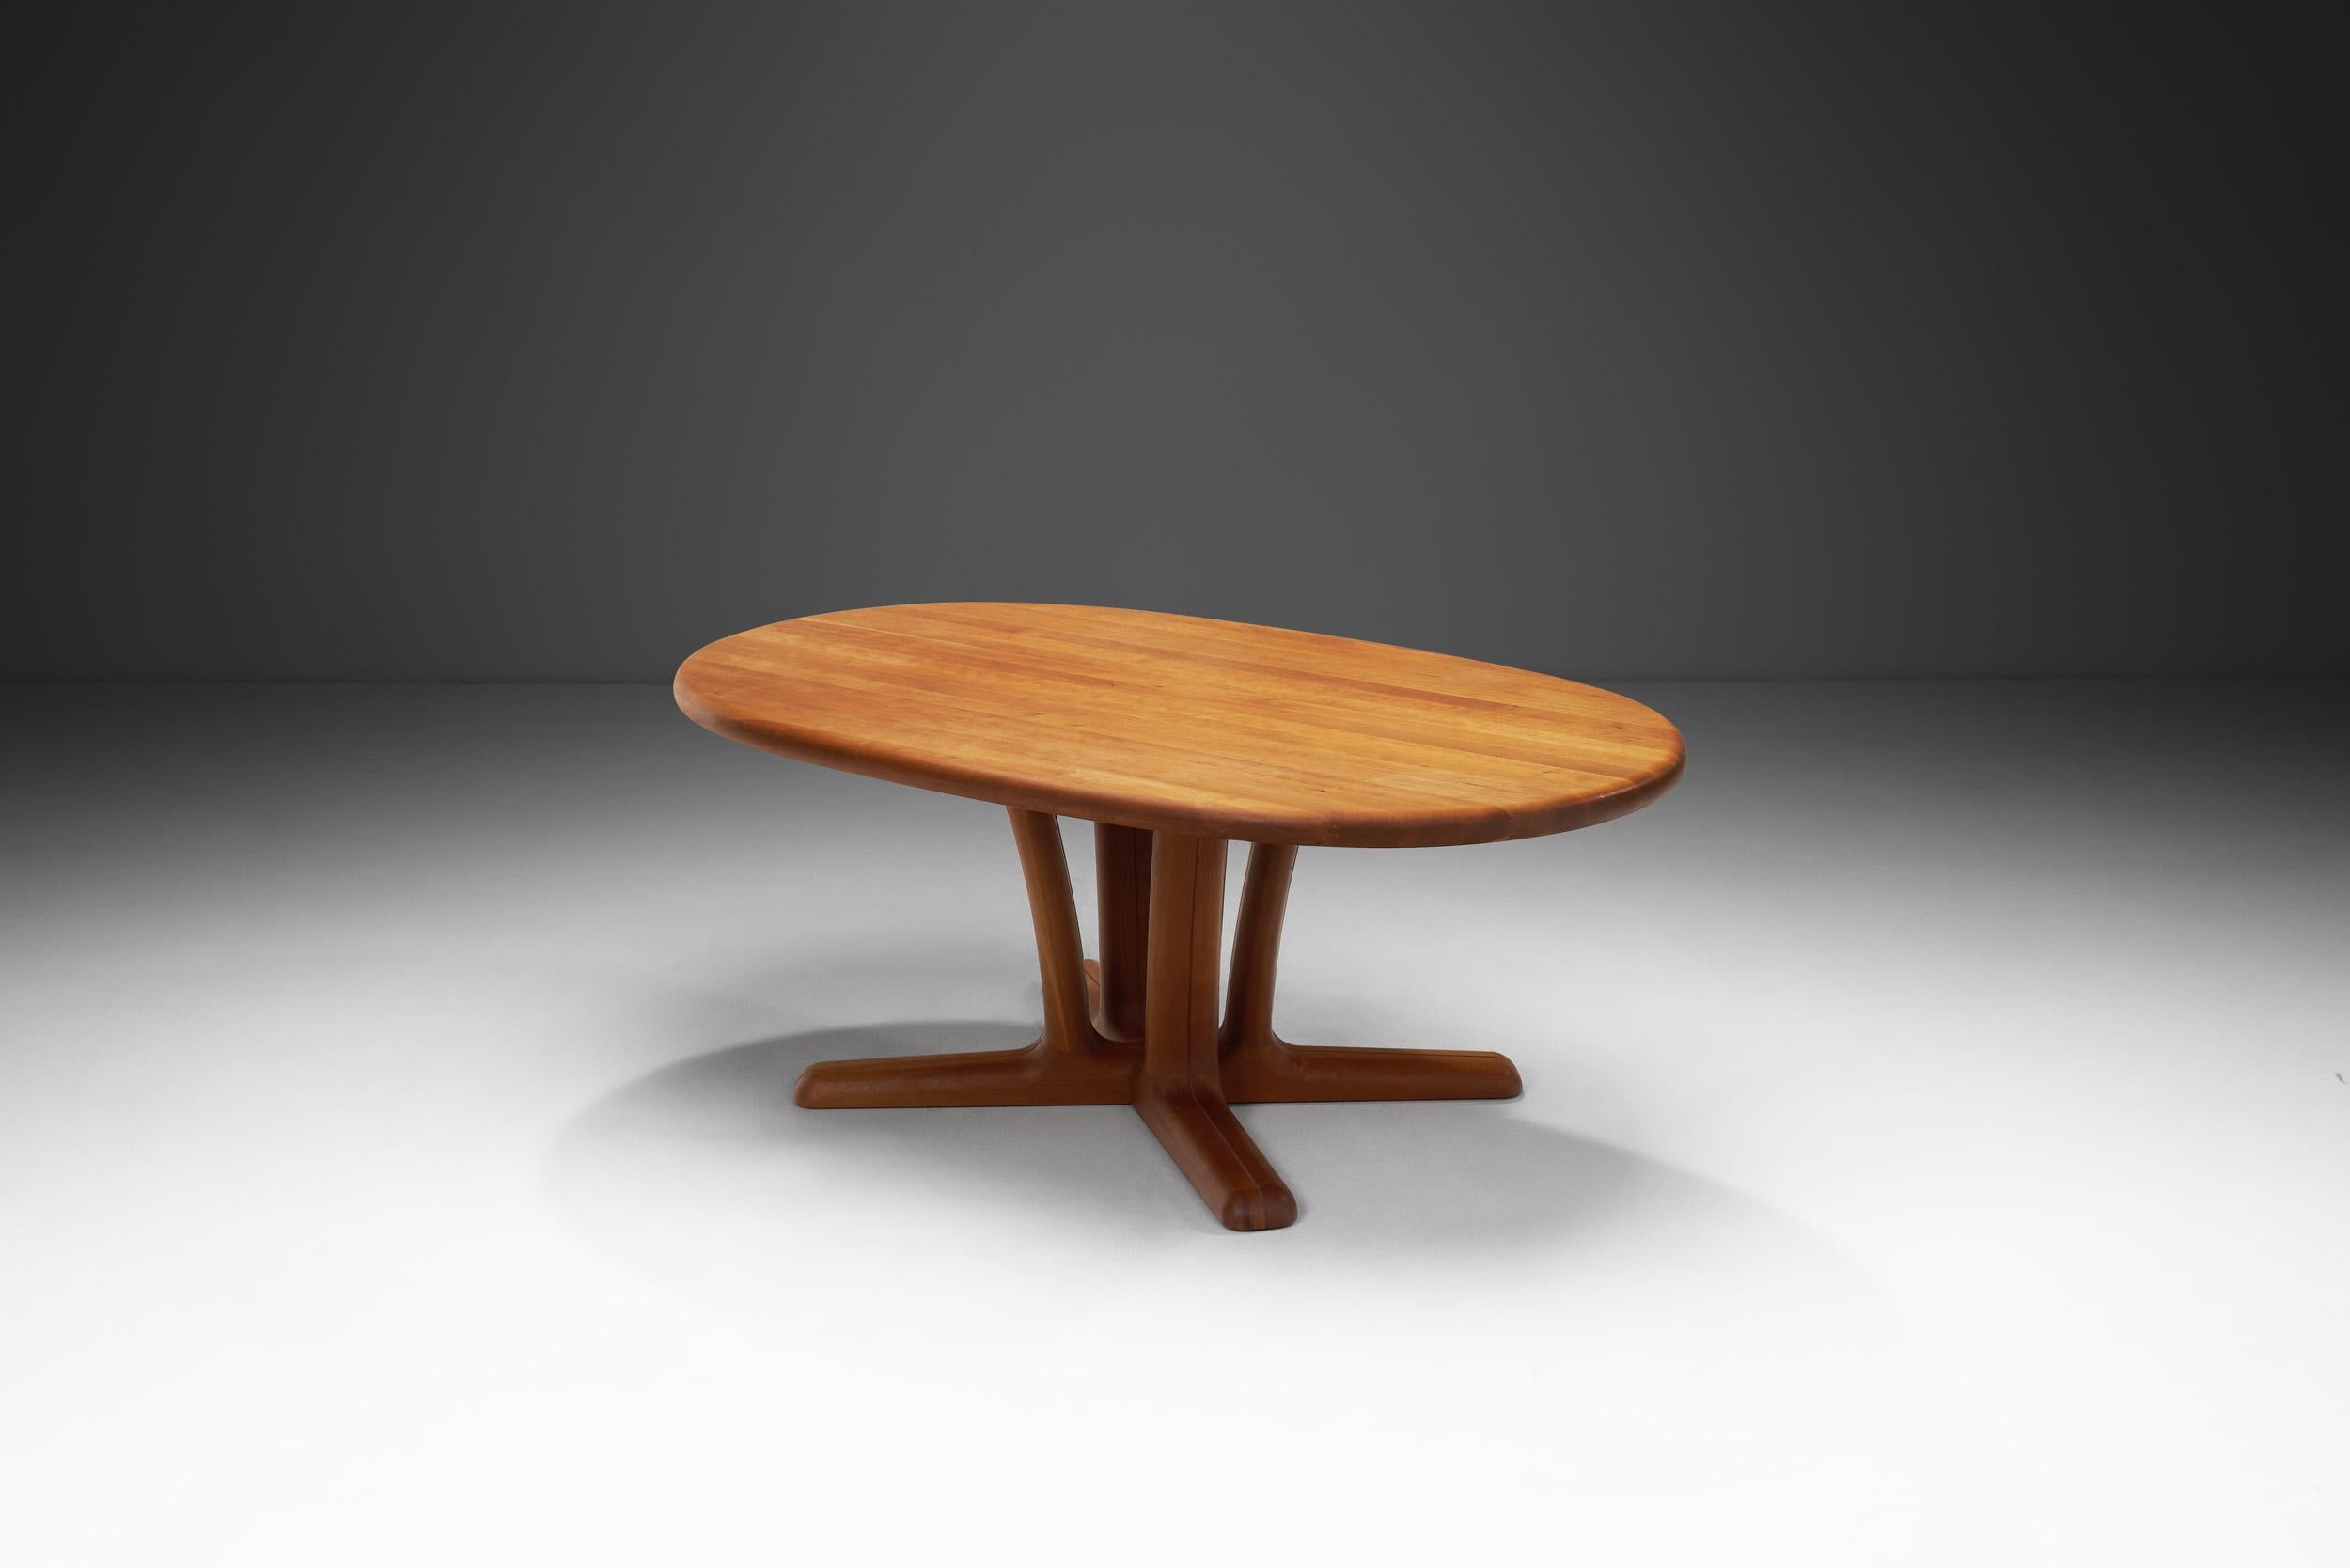 Precious woods and hand finishing define the furniture pieces made by the Danish company founded in 1960, Dyrlund. As this solid teak coffee table shows, great emphasis is placed on skilled craftsmanship with experts who work in the old